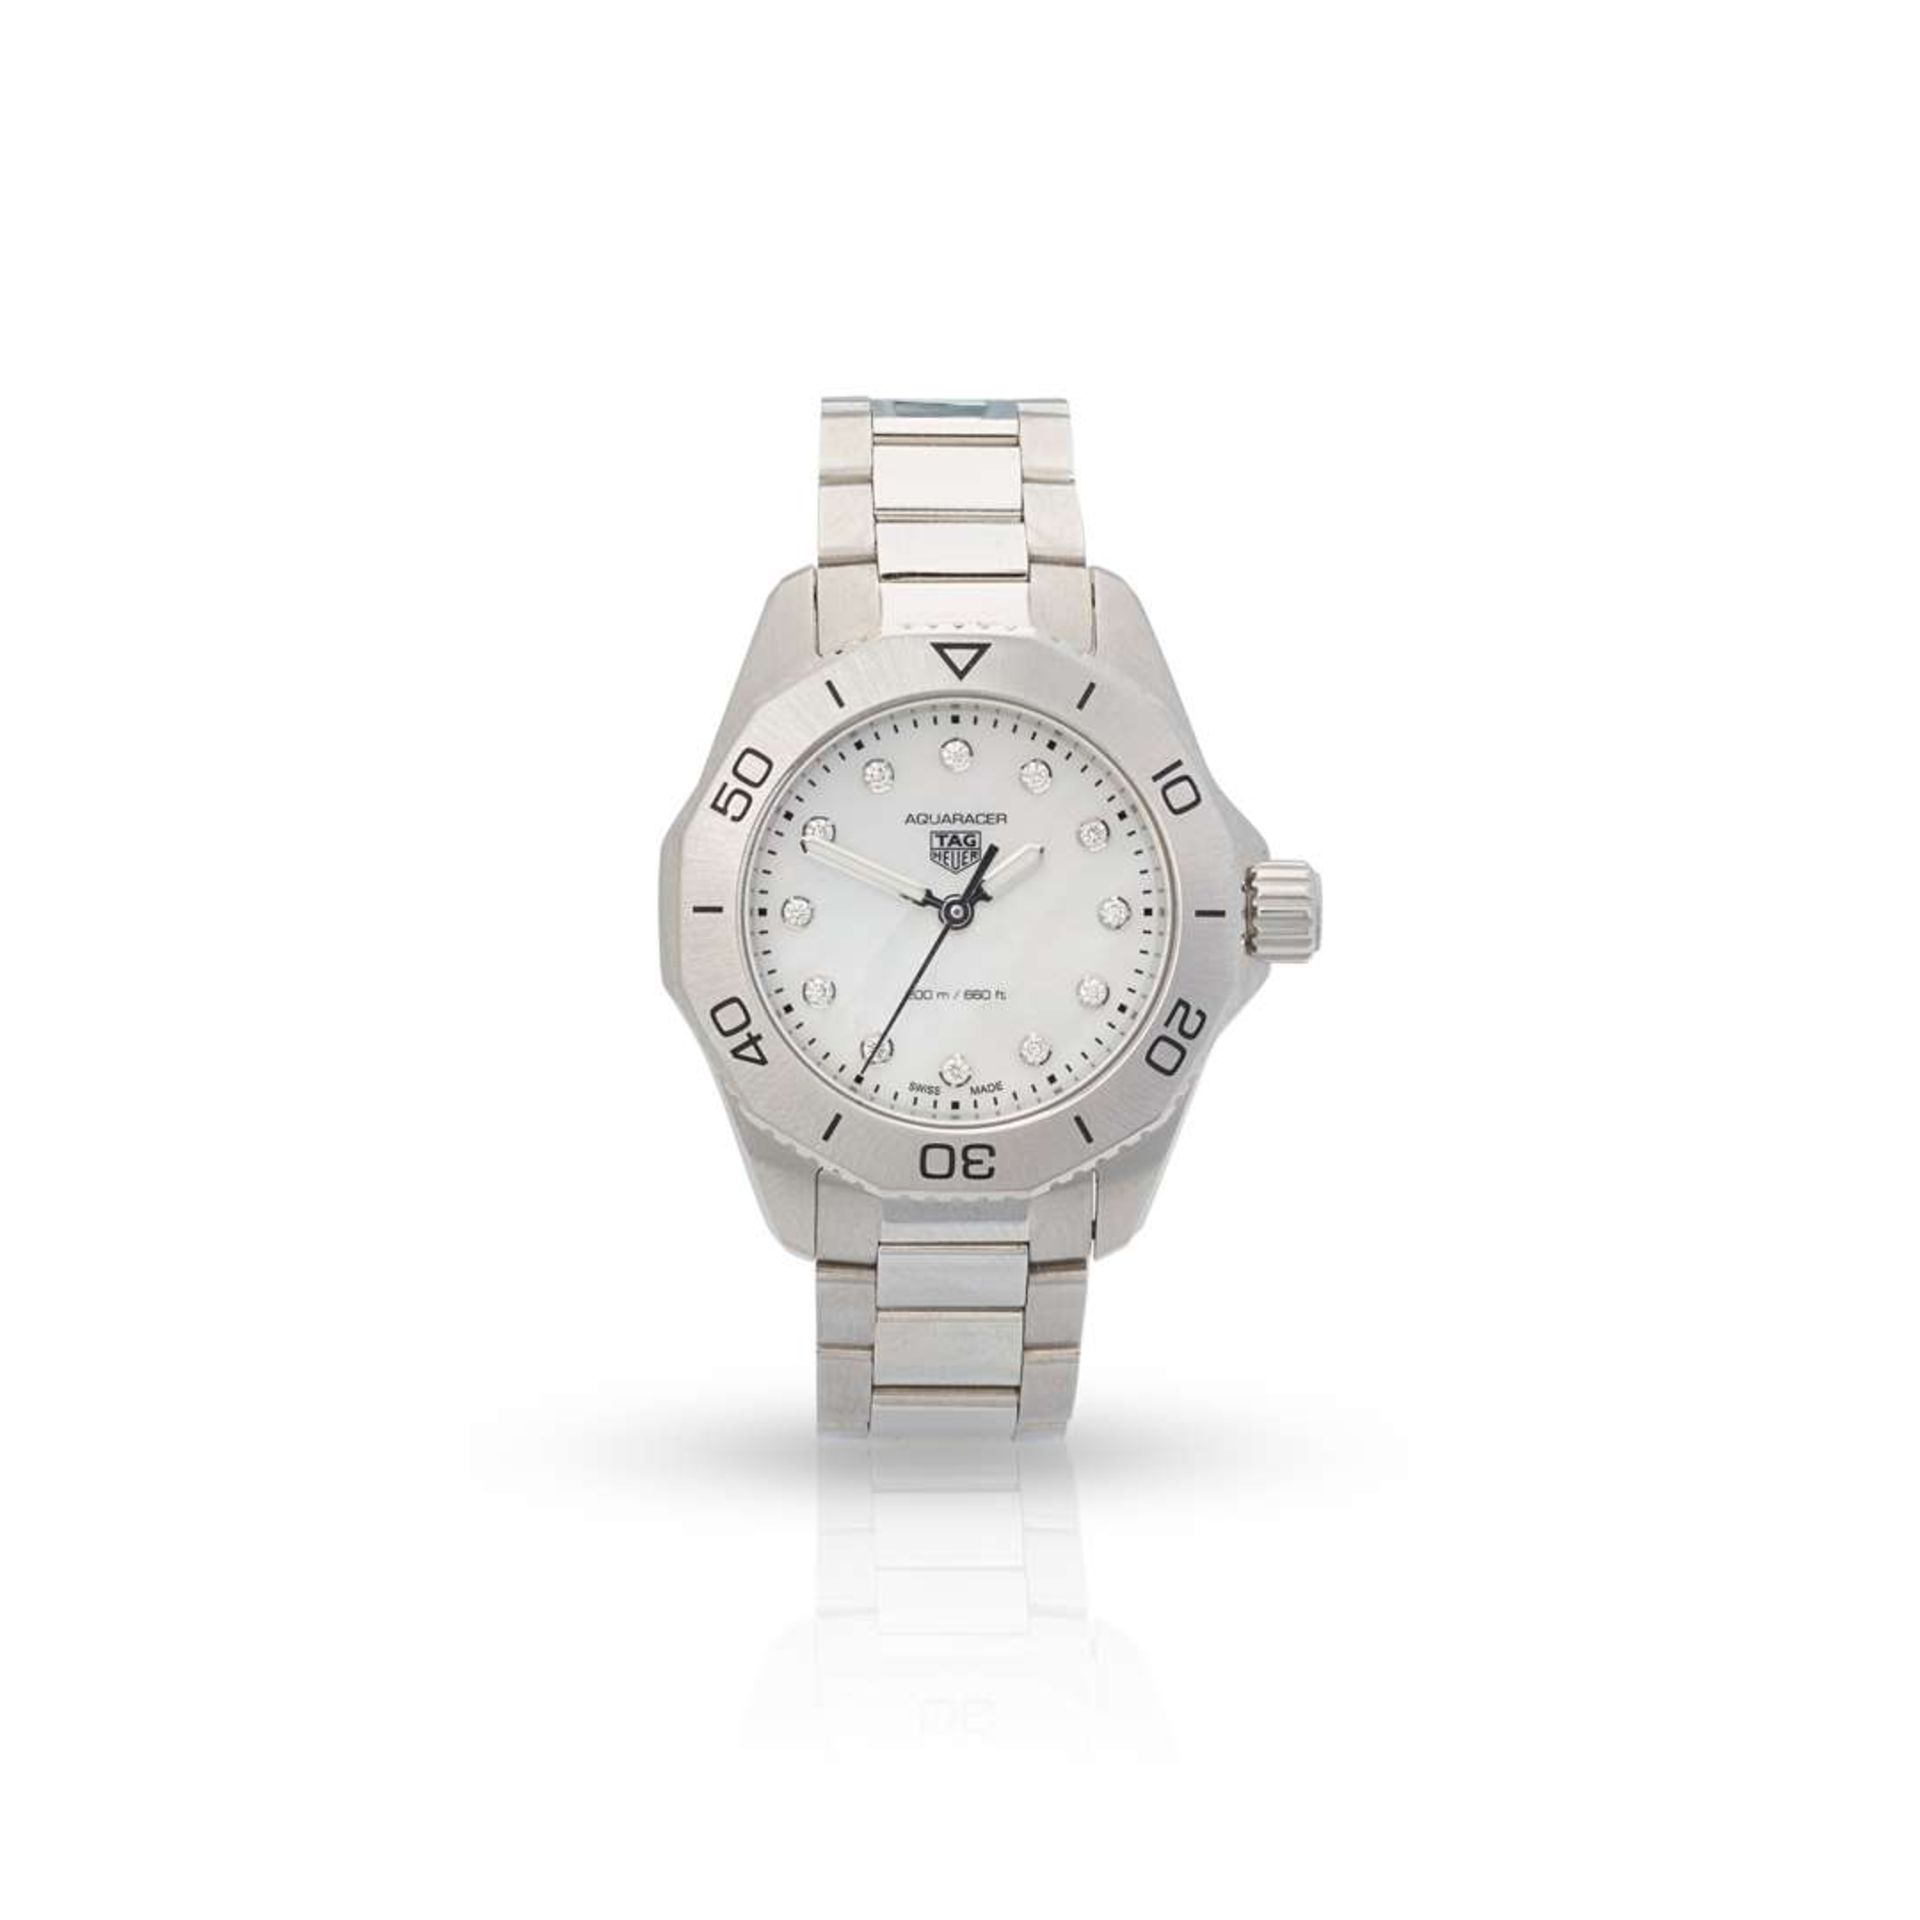 Tag Heuer: A stainless steel Ladies dive watch with diamond-set mother of pearl dial